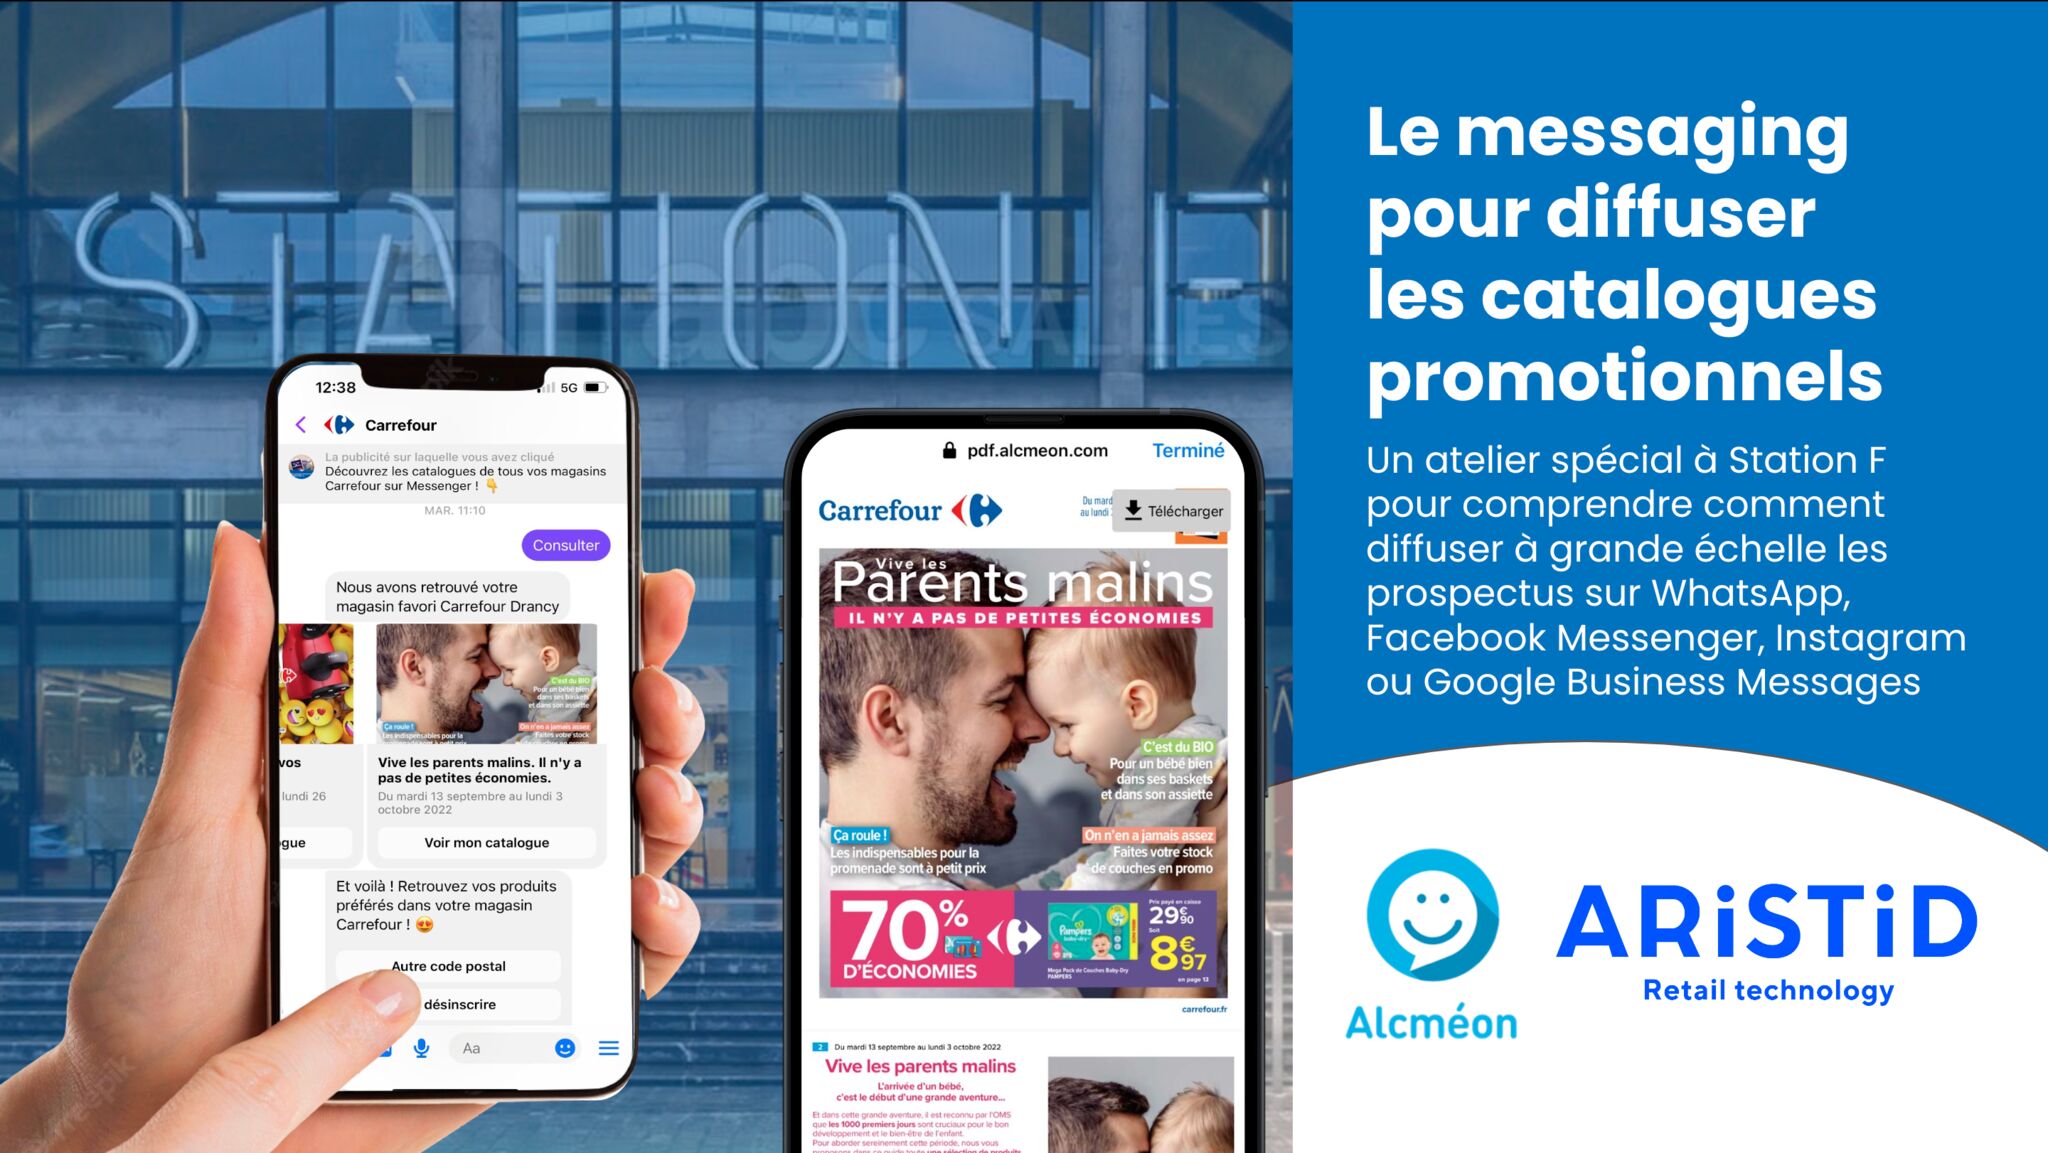 Alcméon x ARISTID > all about promotional catalogs on messaging